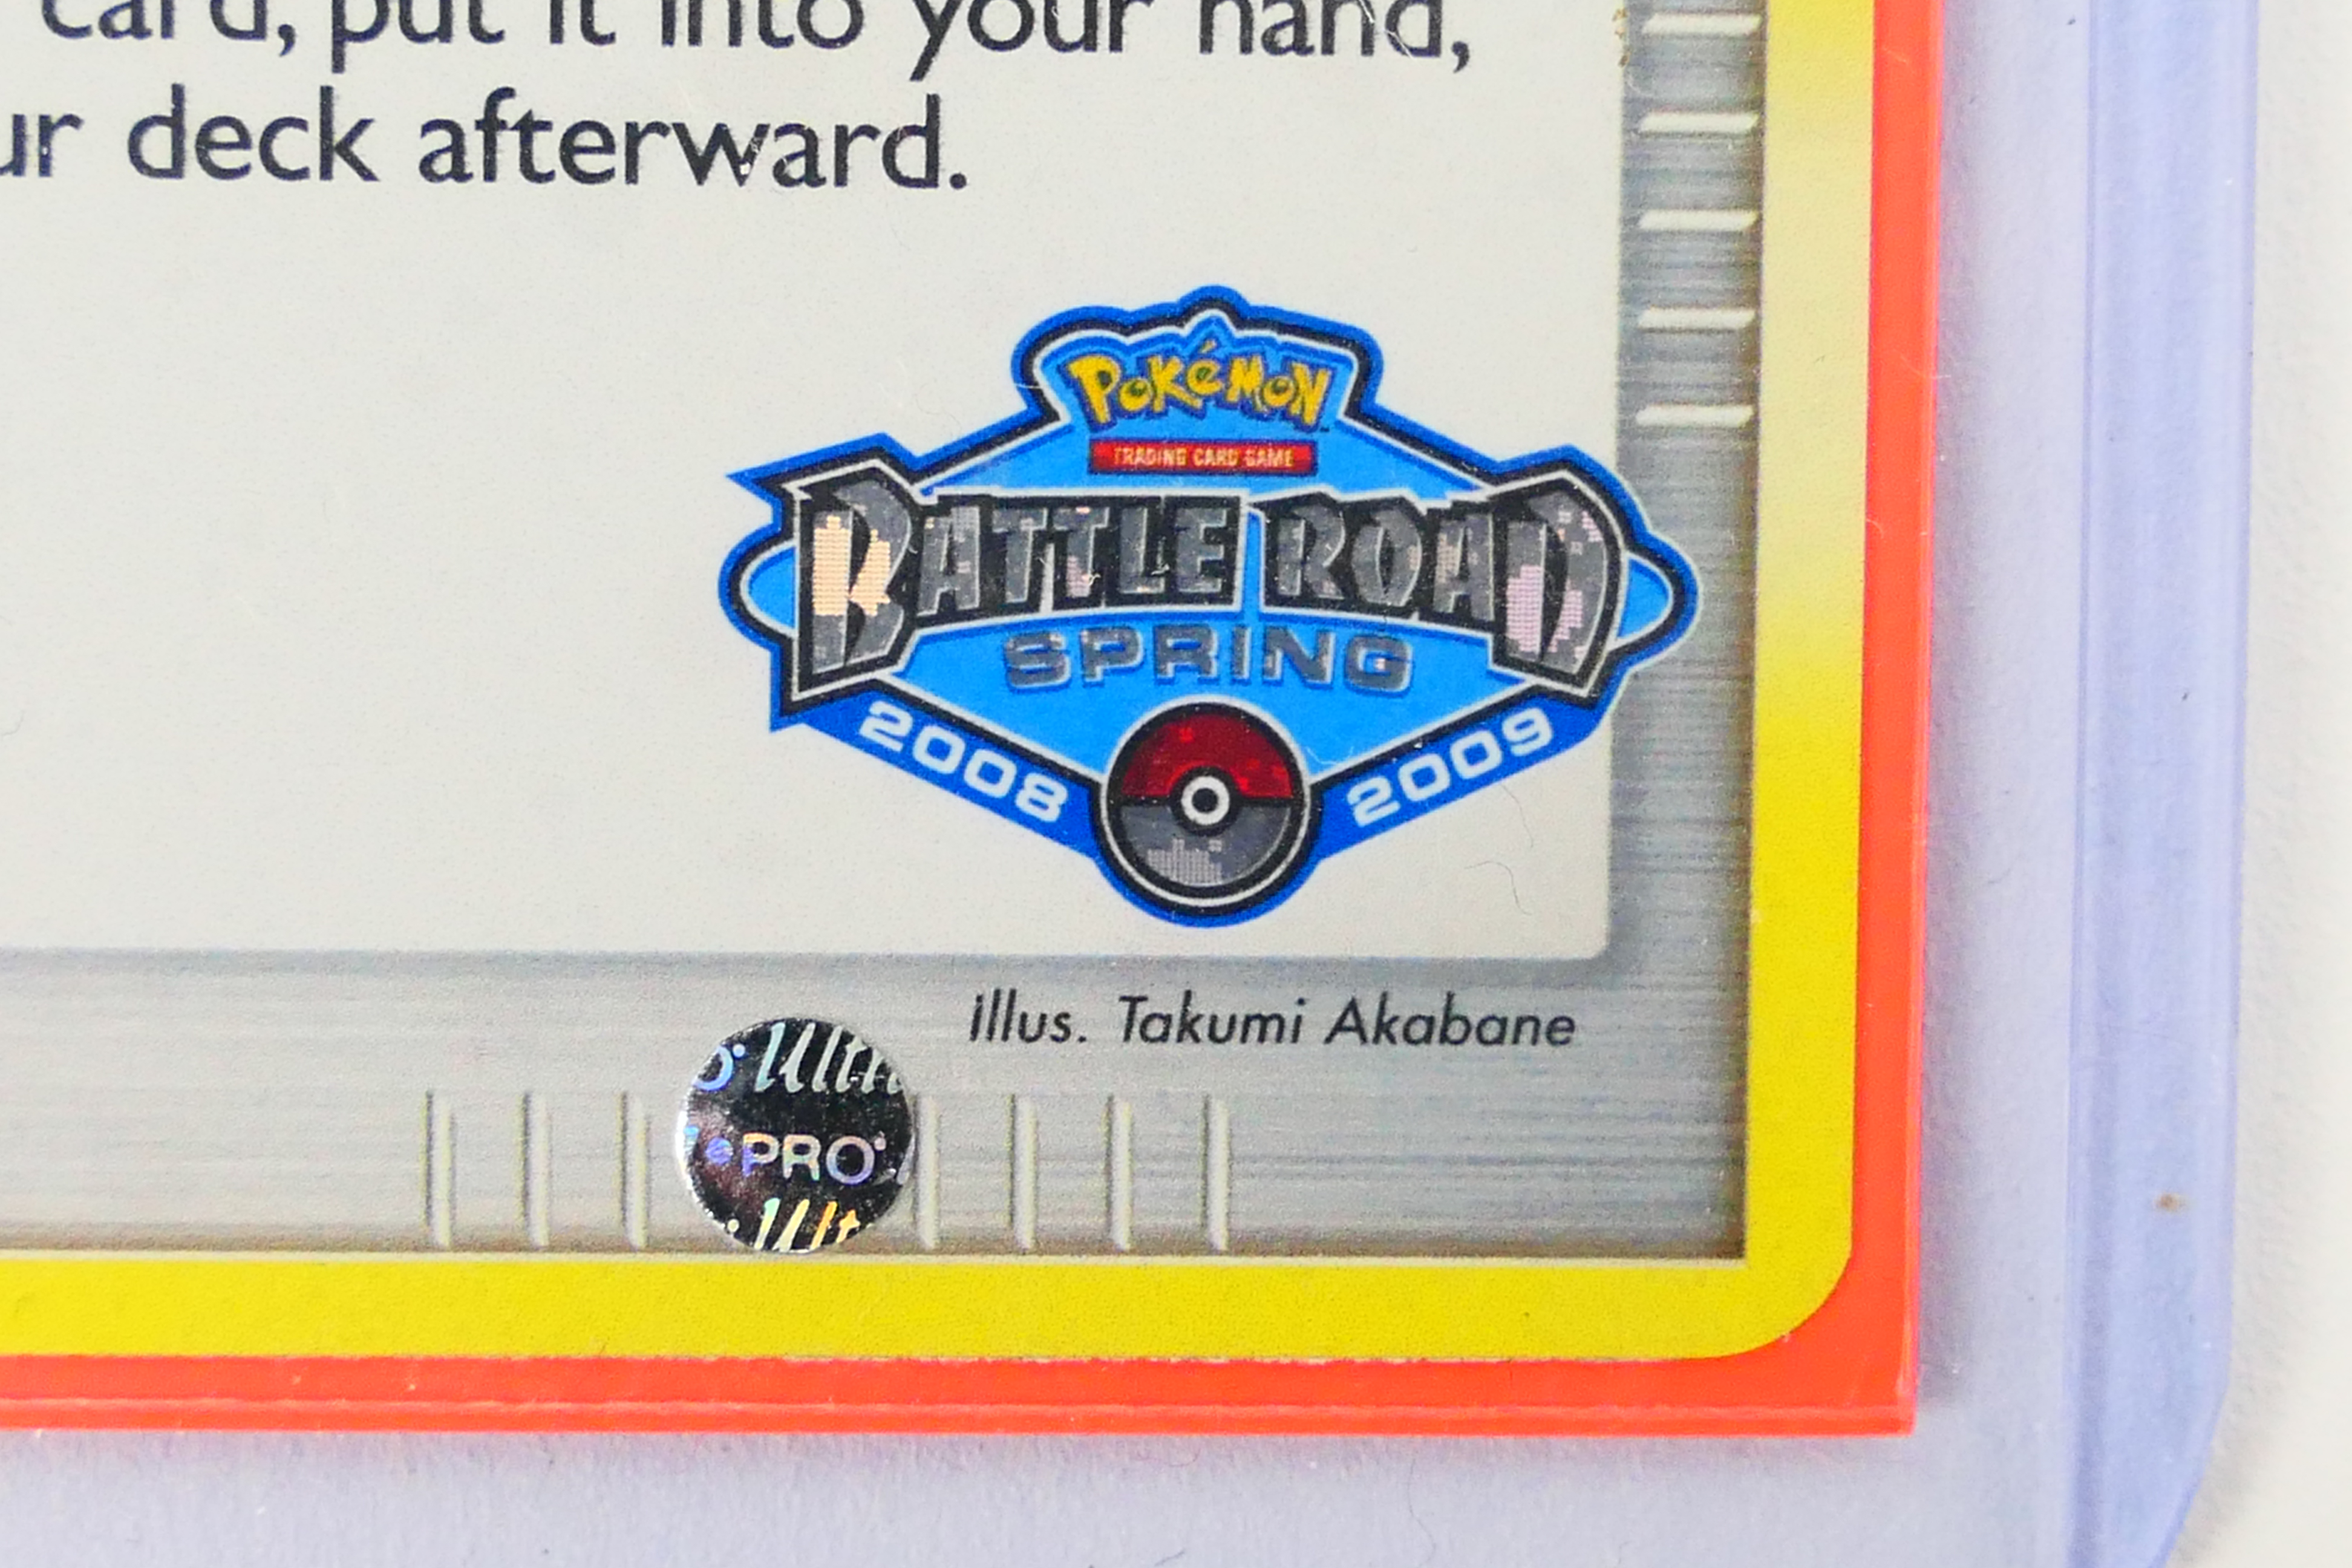 Pokemon - A Pokemon Battle Road Victory Medal Trainer Card for Spring 2008 / 2009, - Image 2 of 5